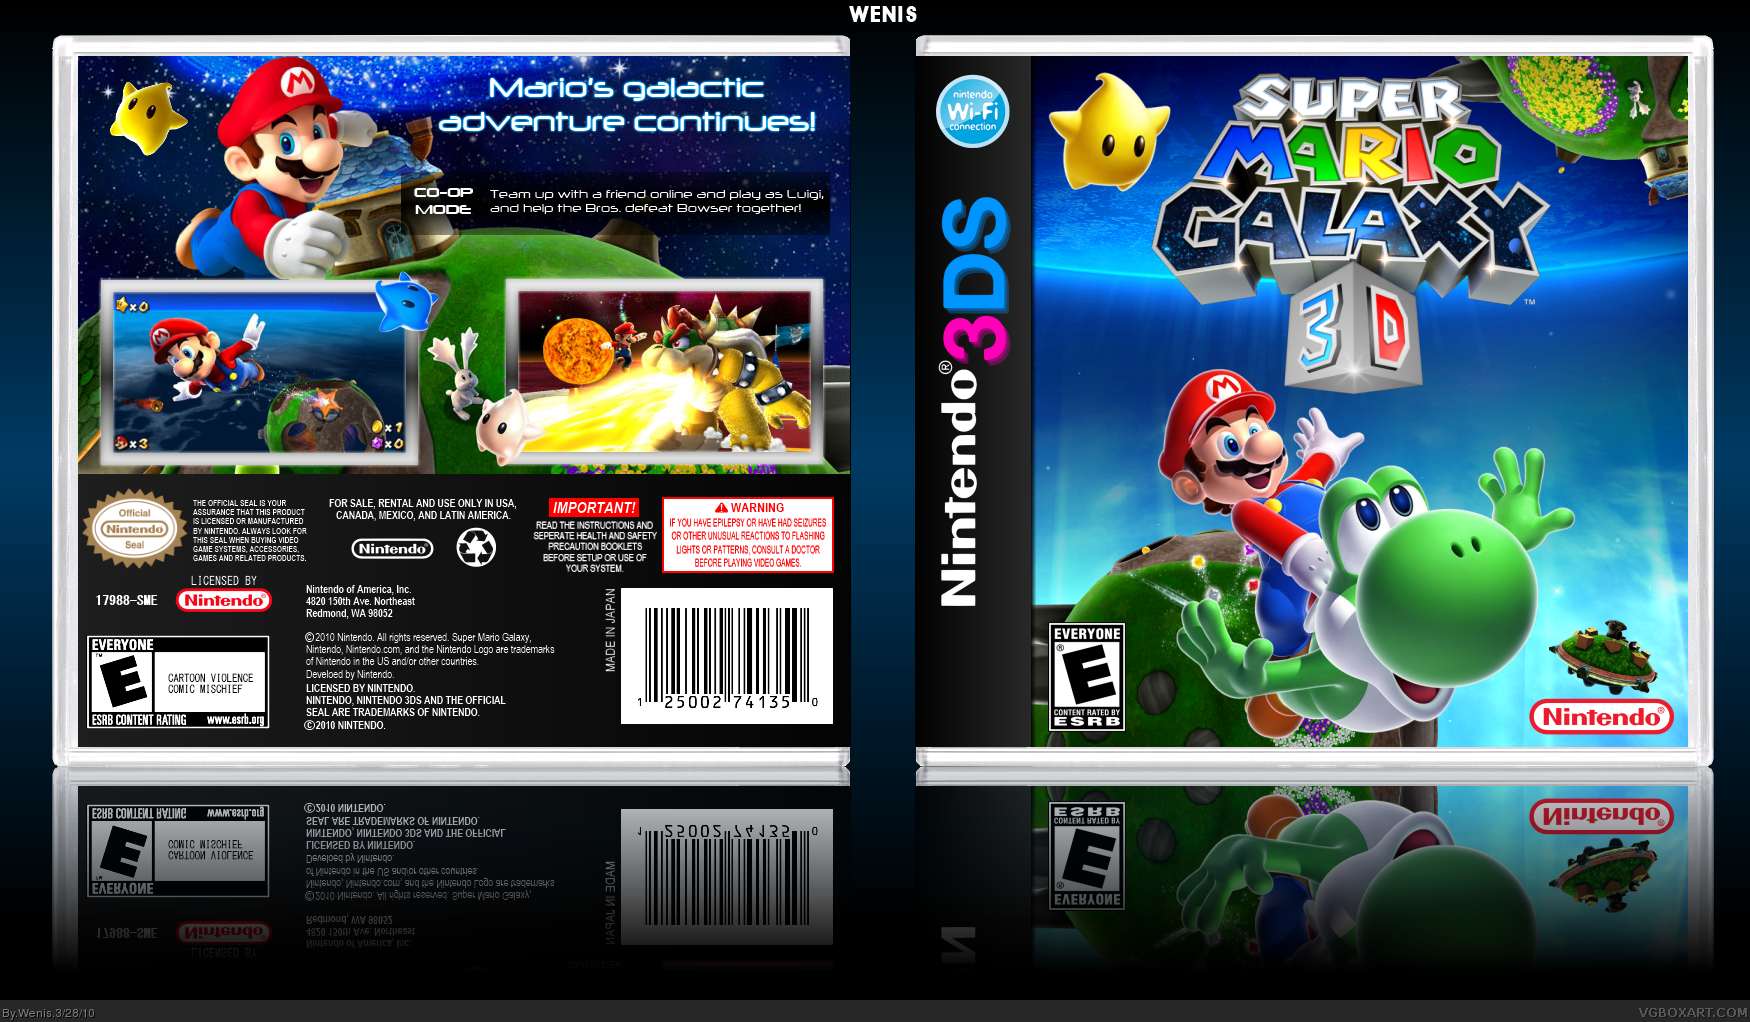 Viewing full size Super Mario Galaxy 3D box cover.